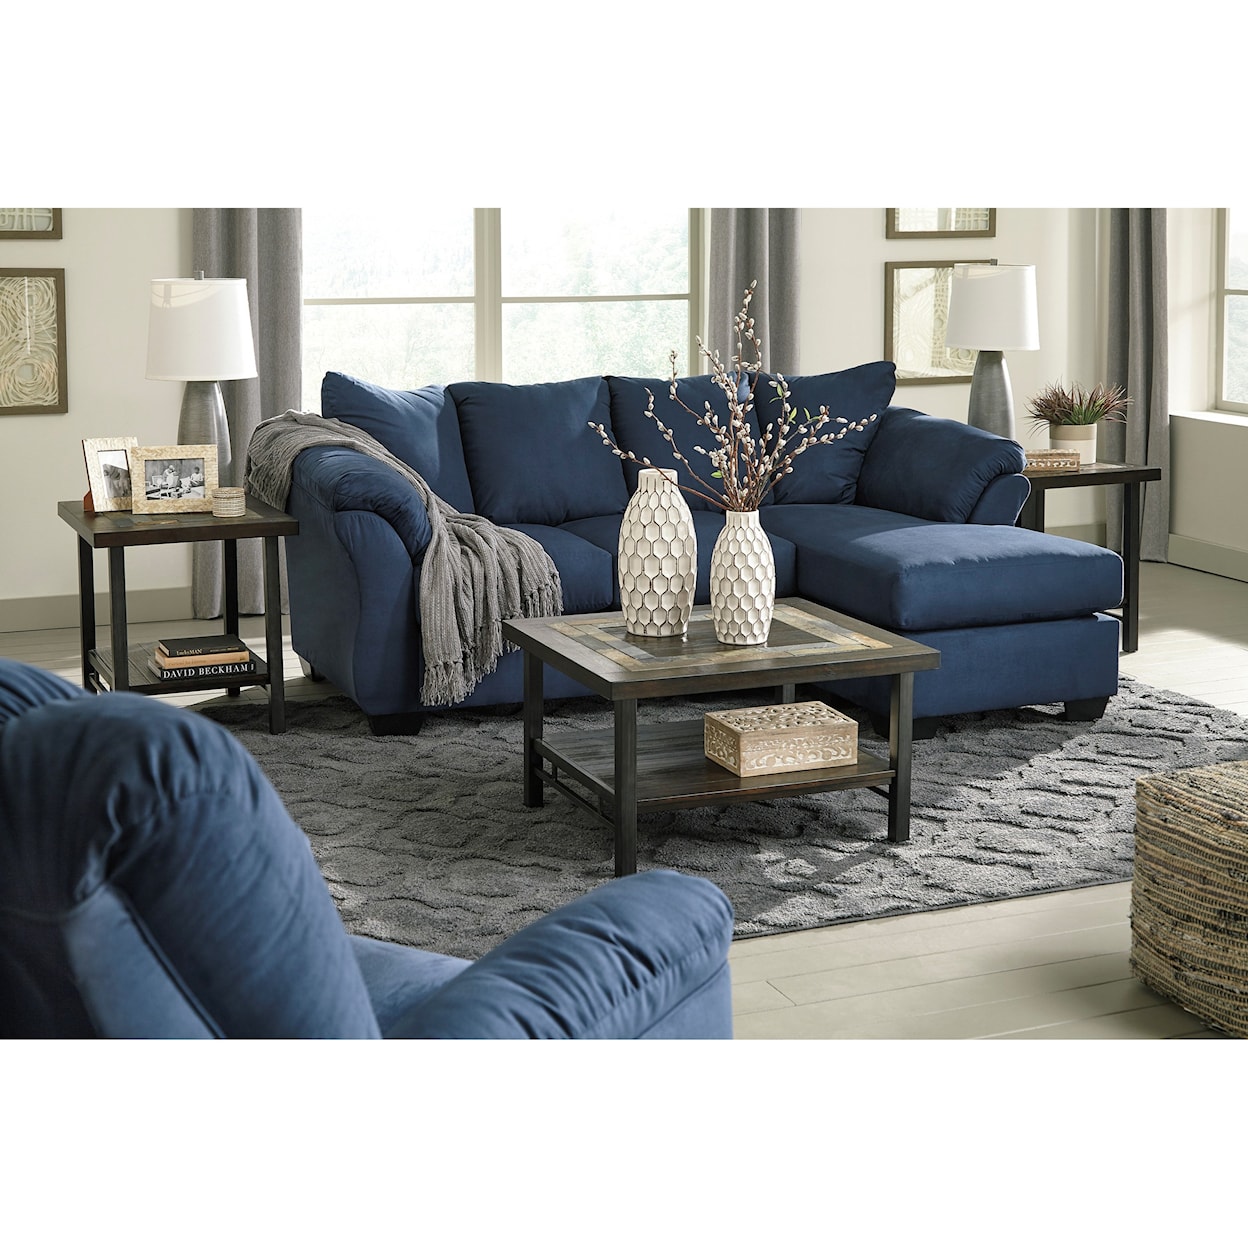 Signature Design by Ashley Darcy 3pc Reclining Living Room Group